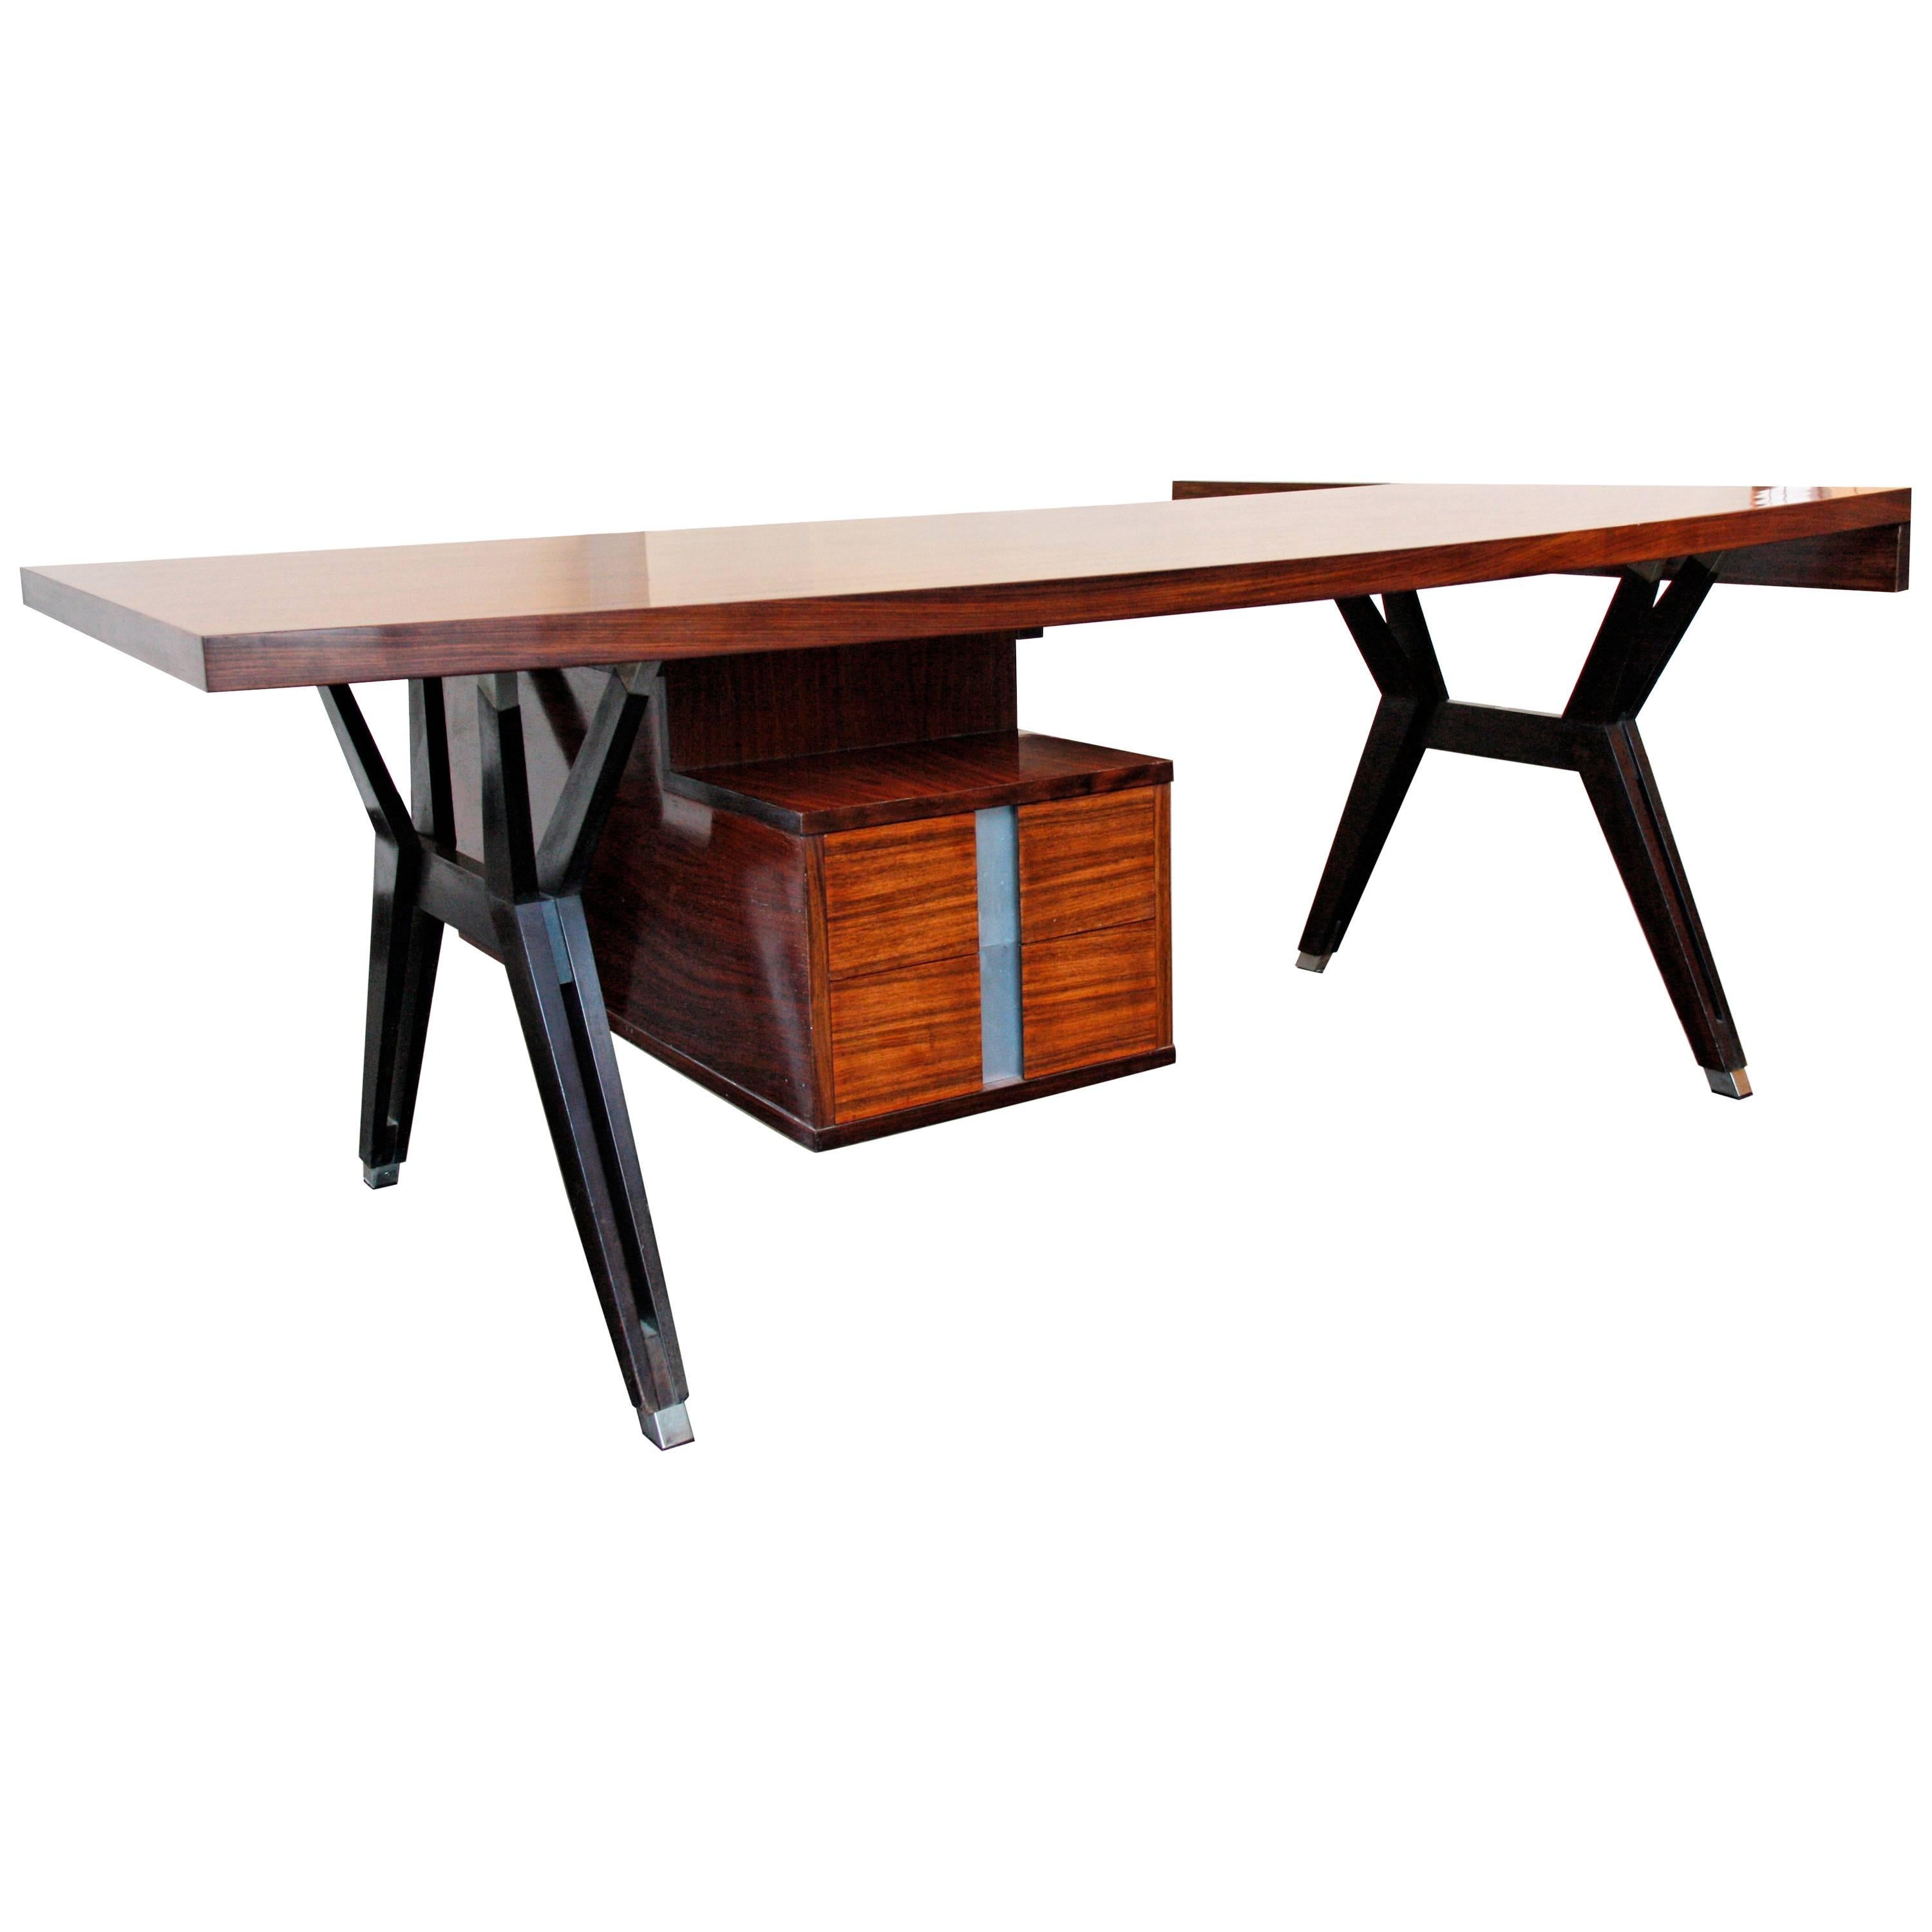 Italian Vintage Desk in Polish Wood by Ico Parisi for MIM, circa 1955 For Sale